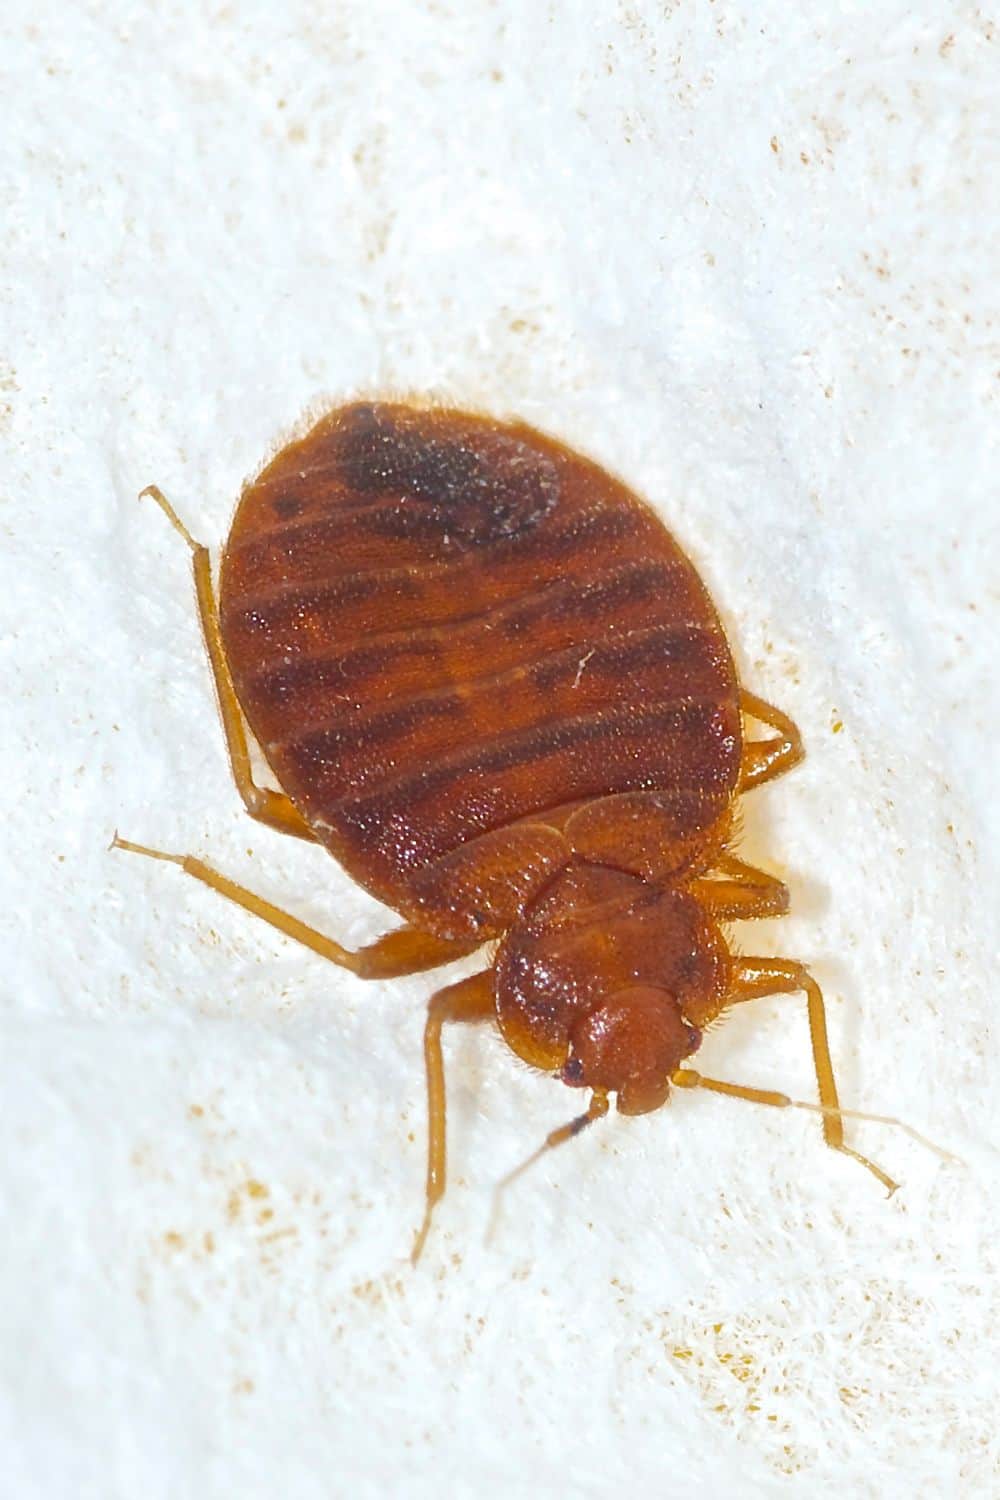 What is a Baby Bed Bug